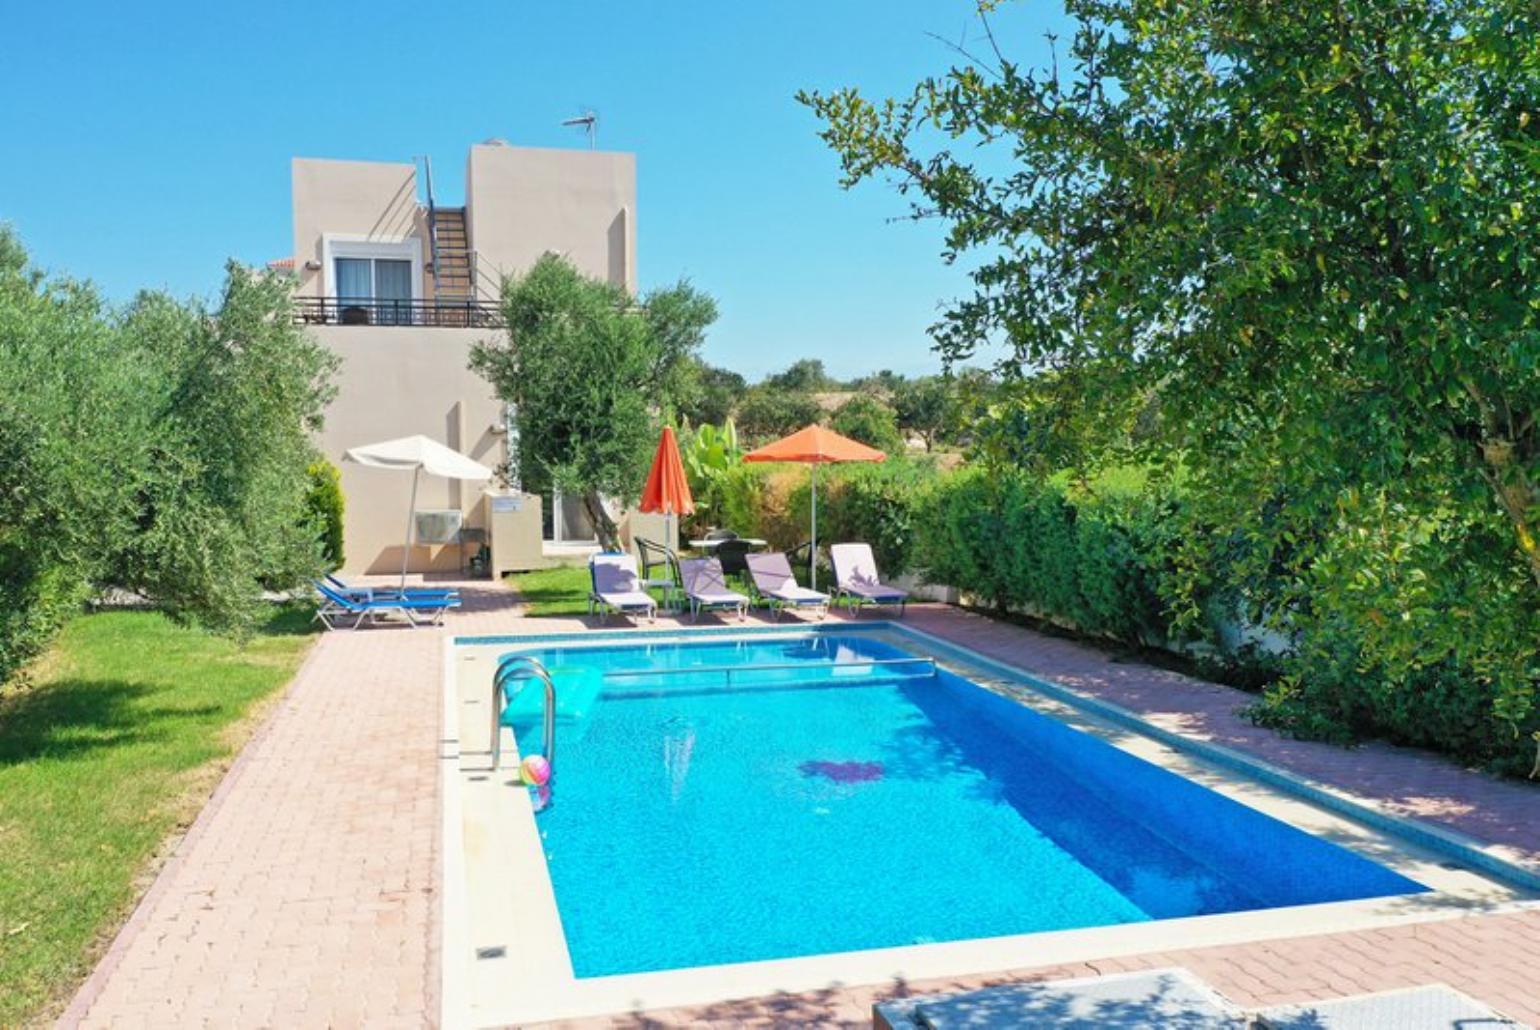 ,Beautiful villa with private pool, terrace, and lawn